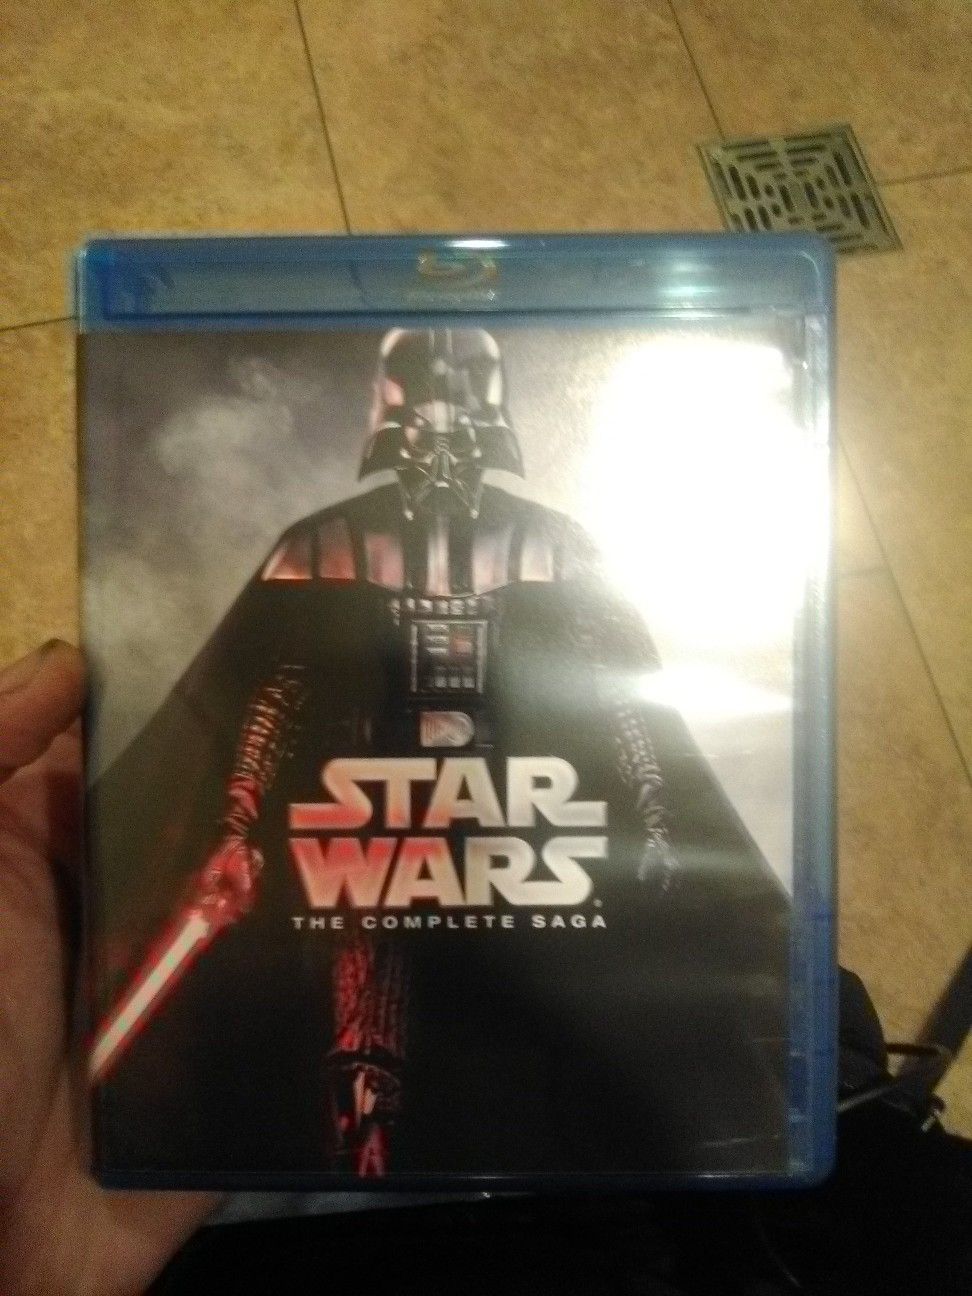 Star Wars The Complete Saga Blu-ray Box Set (Episode I-Episode VI) **Brand New/Never Watched**